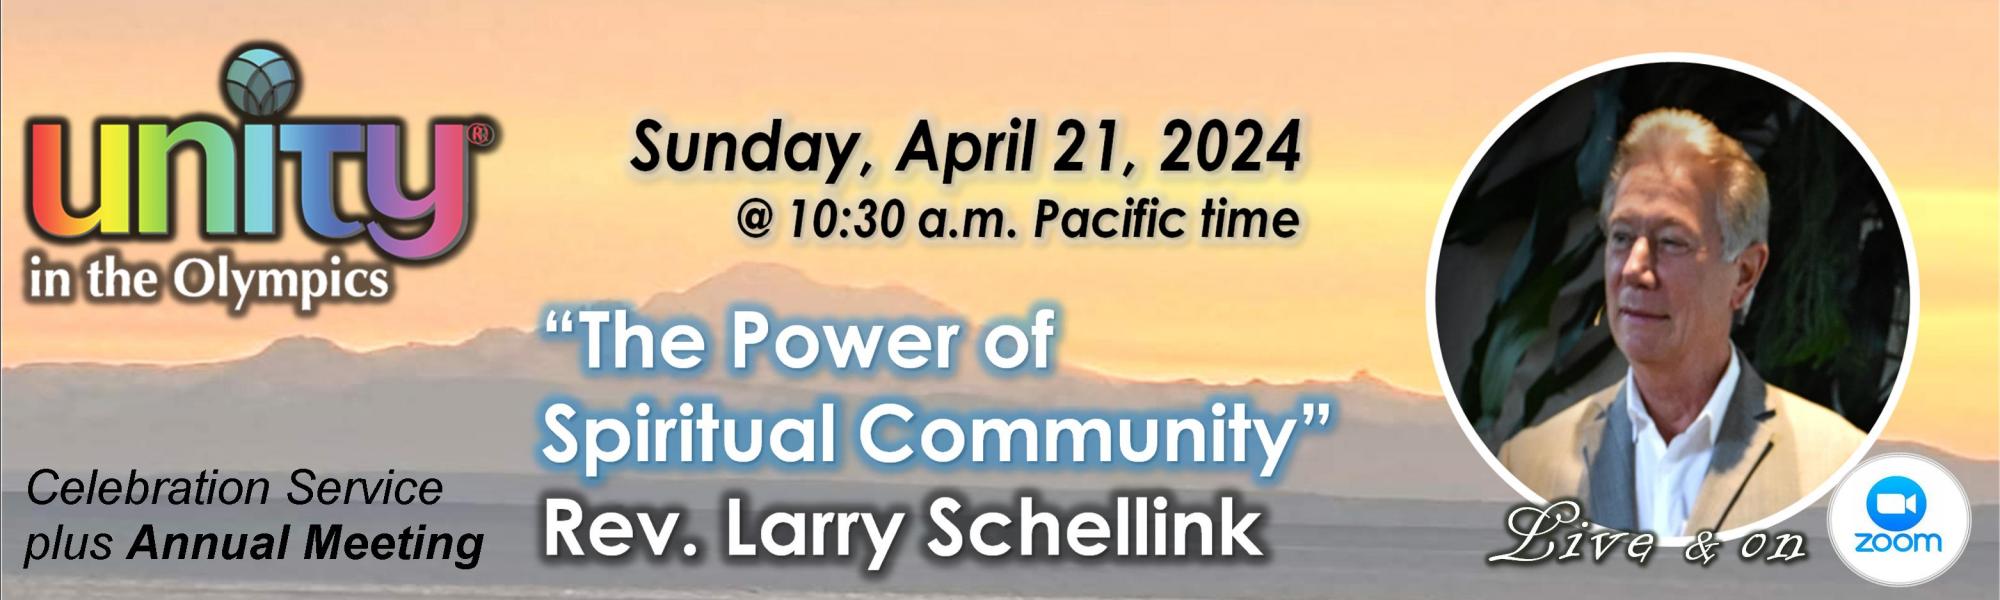 Sunday, April 21, 2024, "The Power of Spiritual Community" with Rev. Larry Schellink